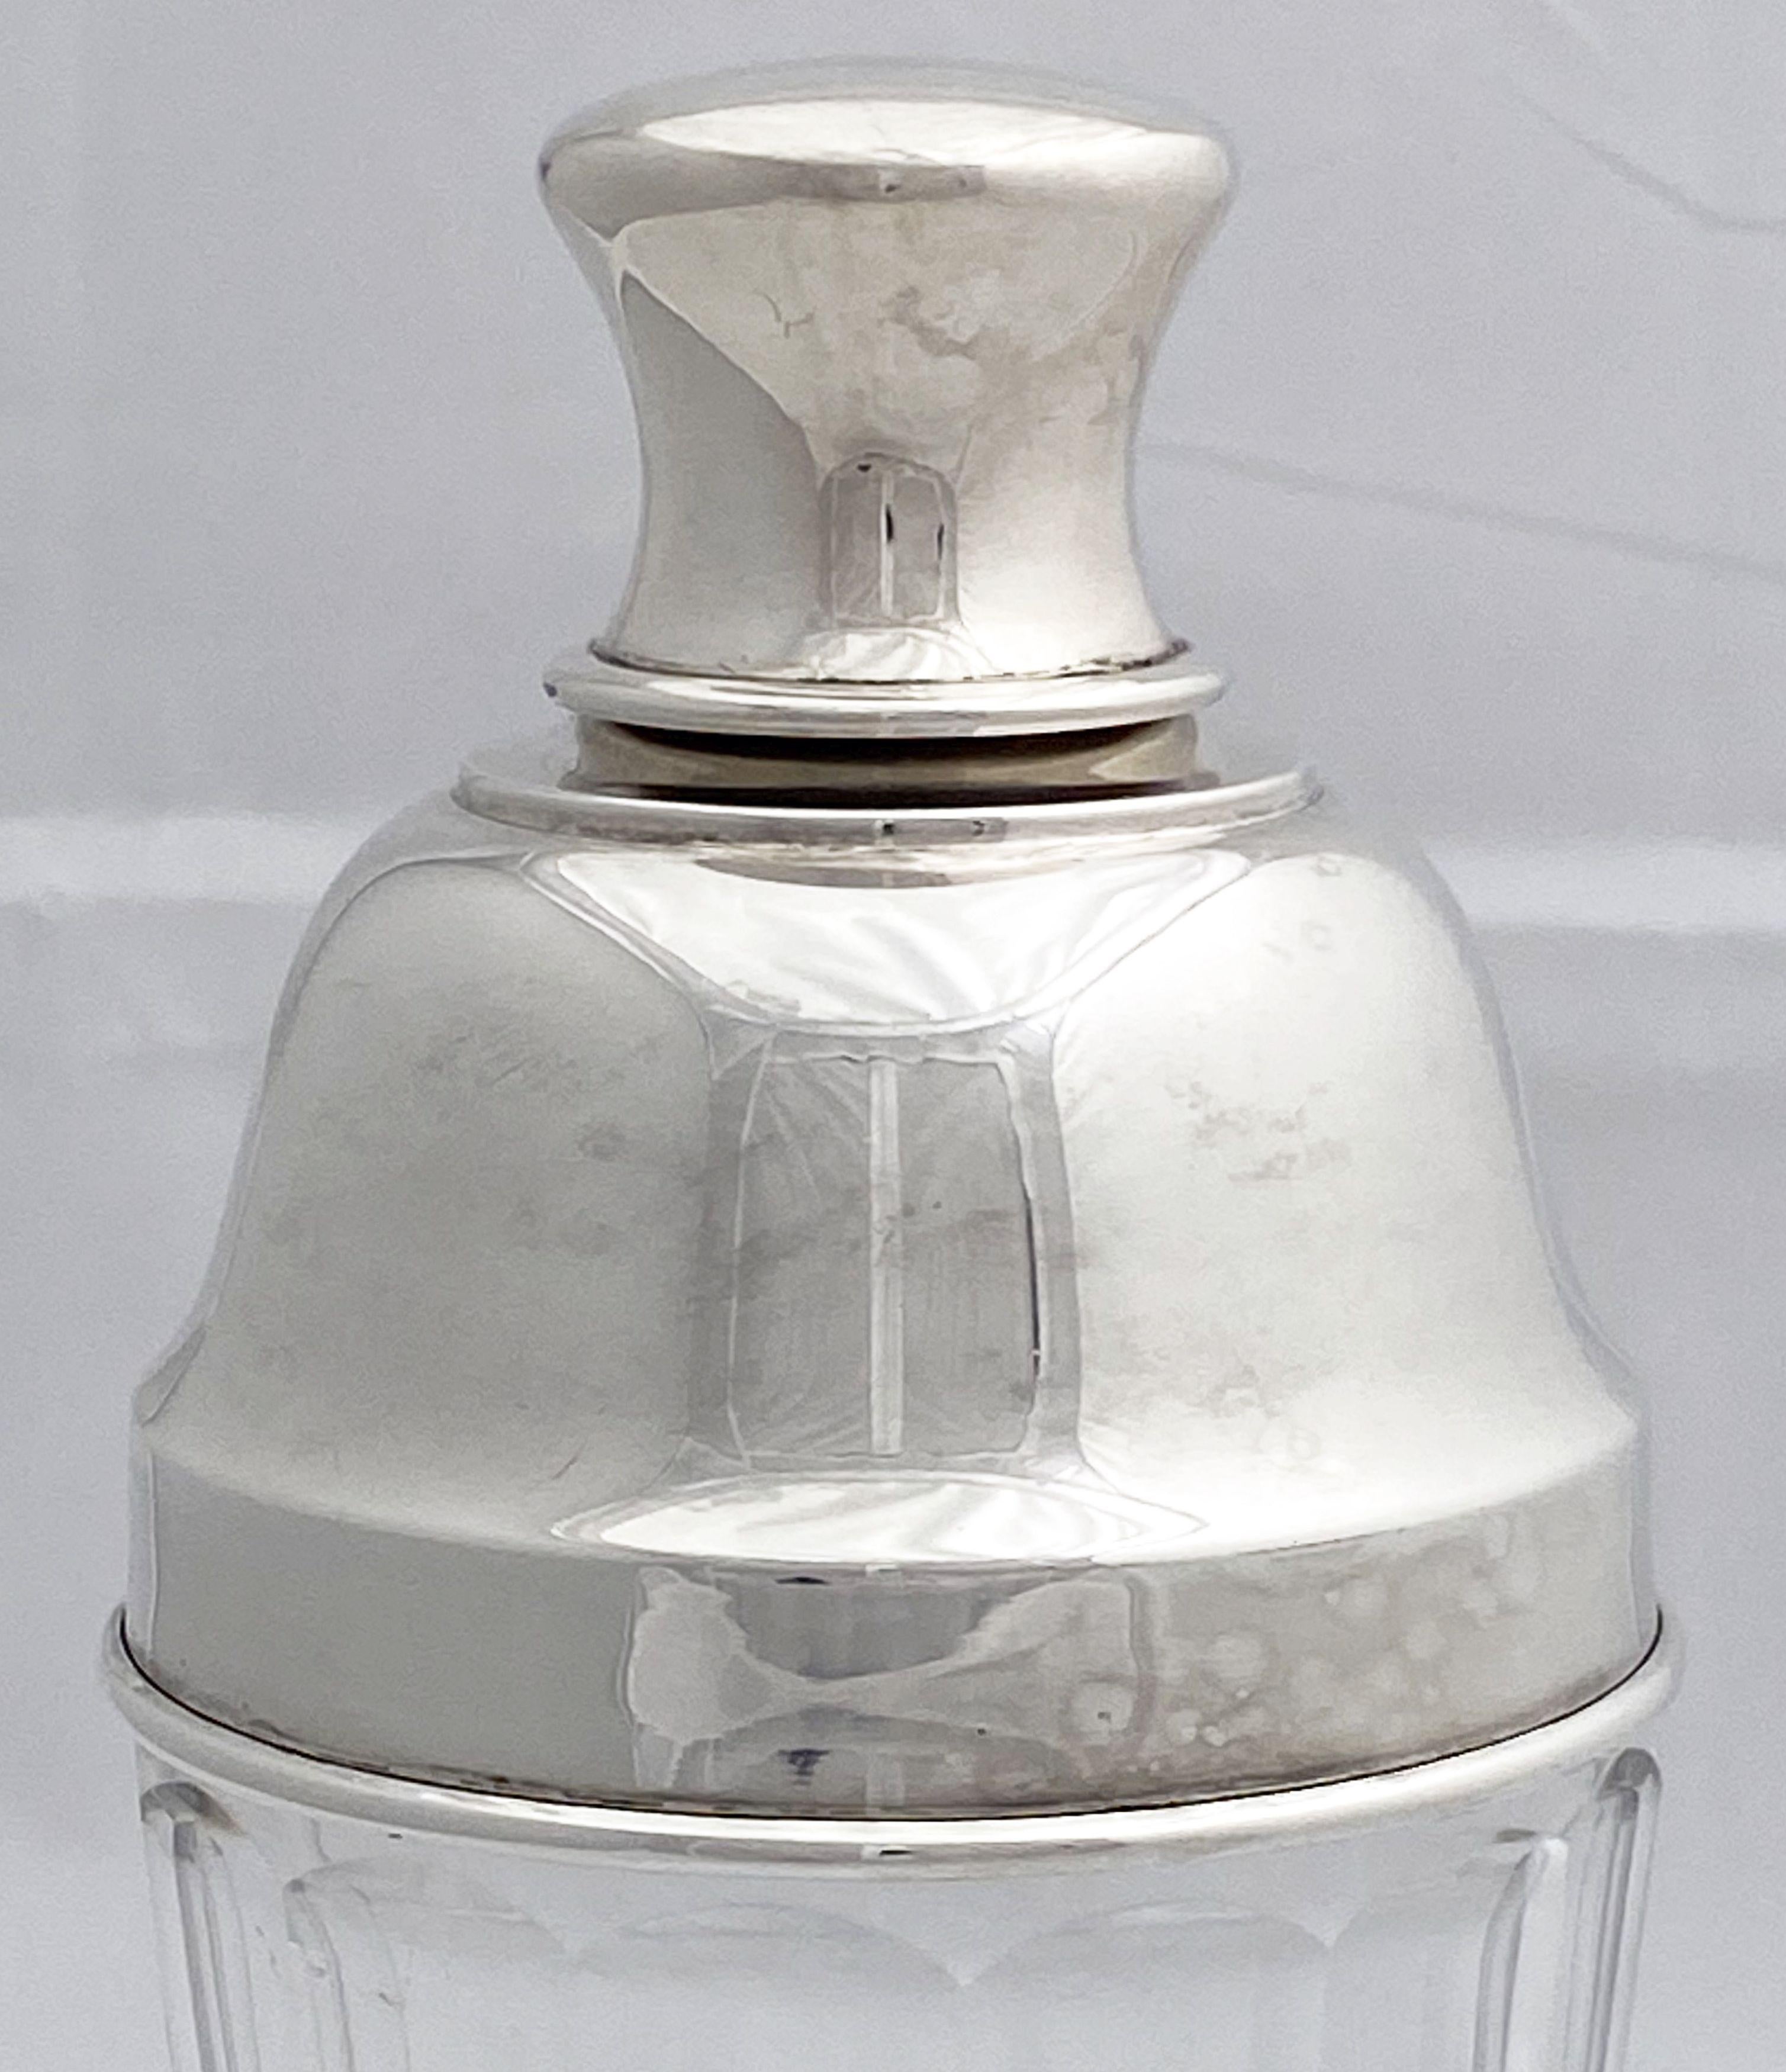 English Art Deco Martini or Cocktail Shaker from England